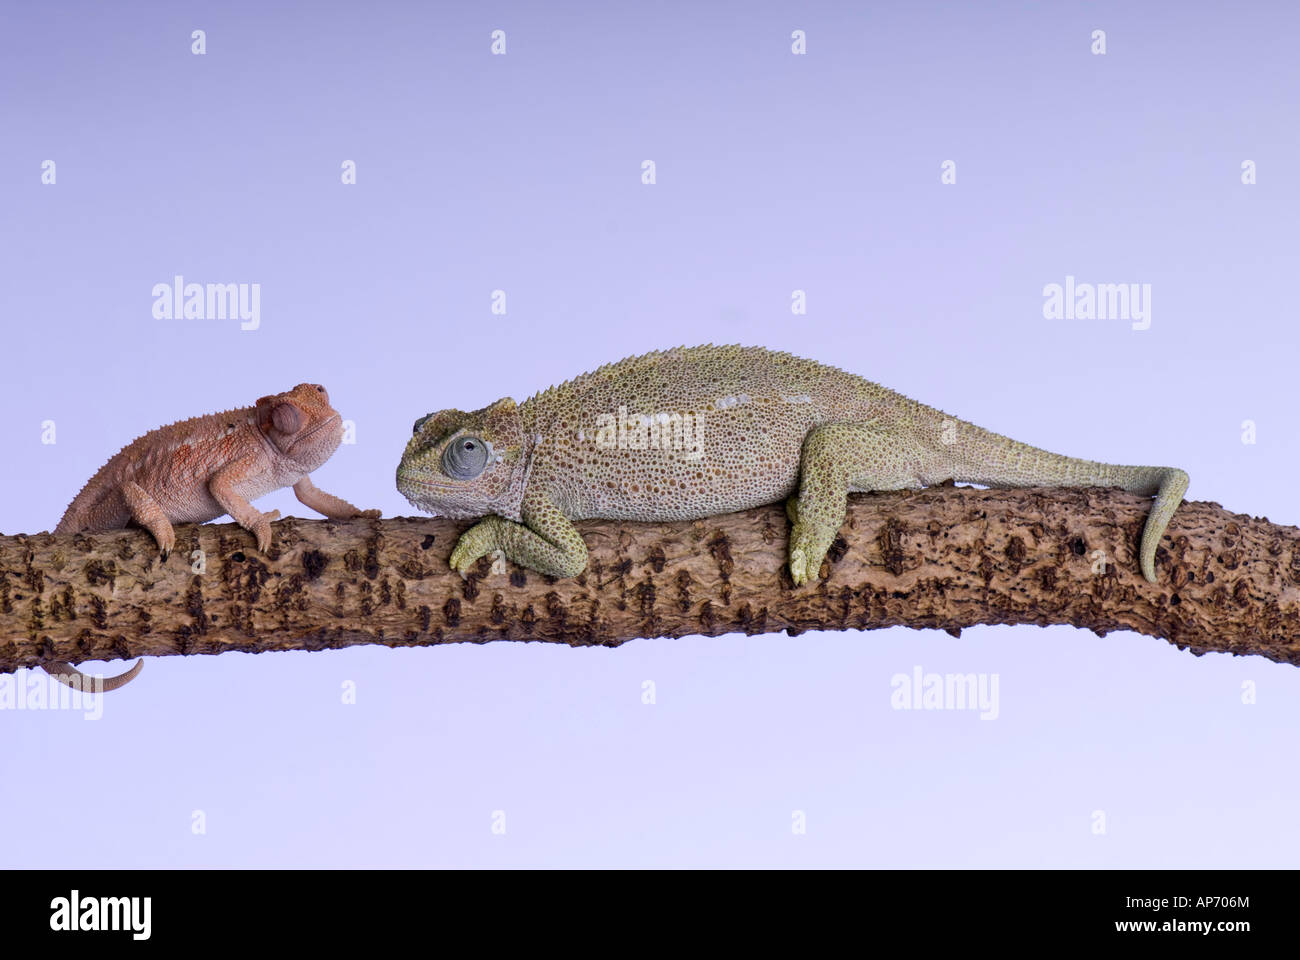 Mother and baby chameleon on branch Stock Photo